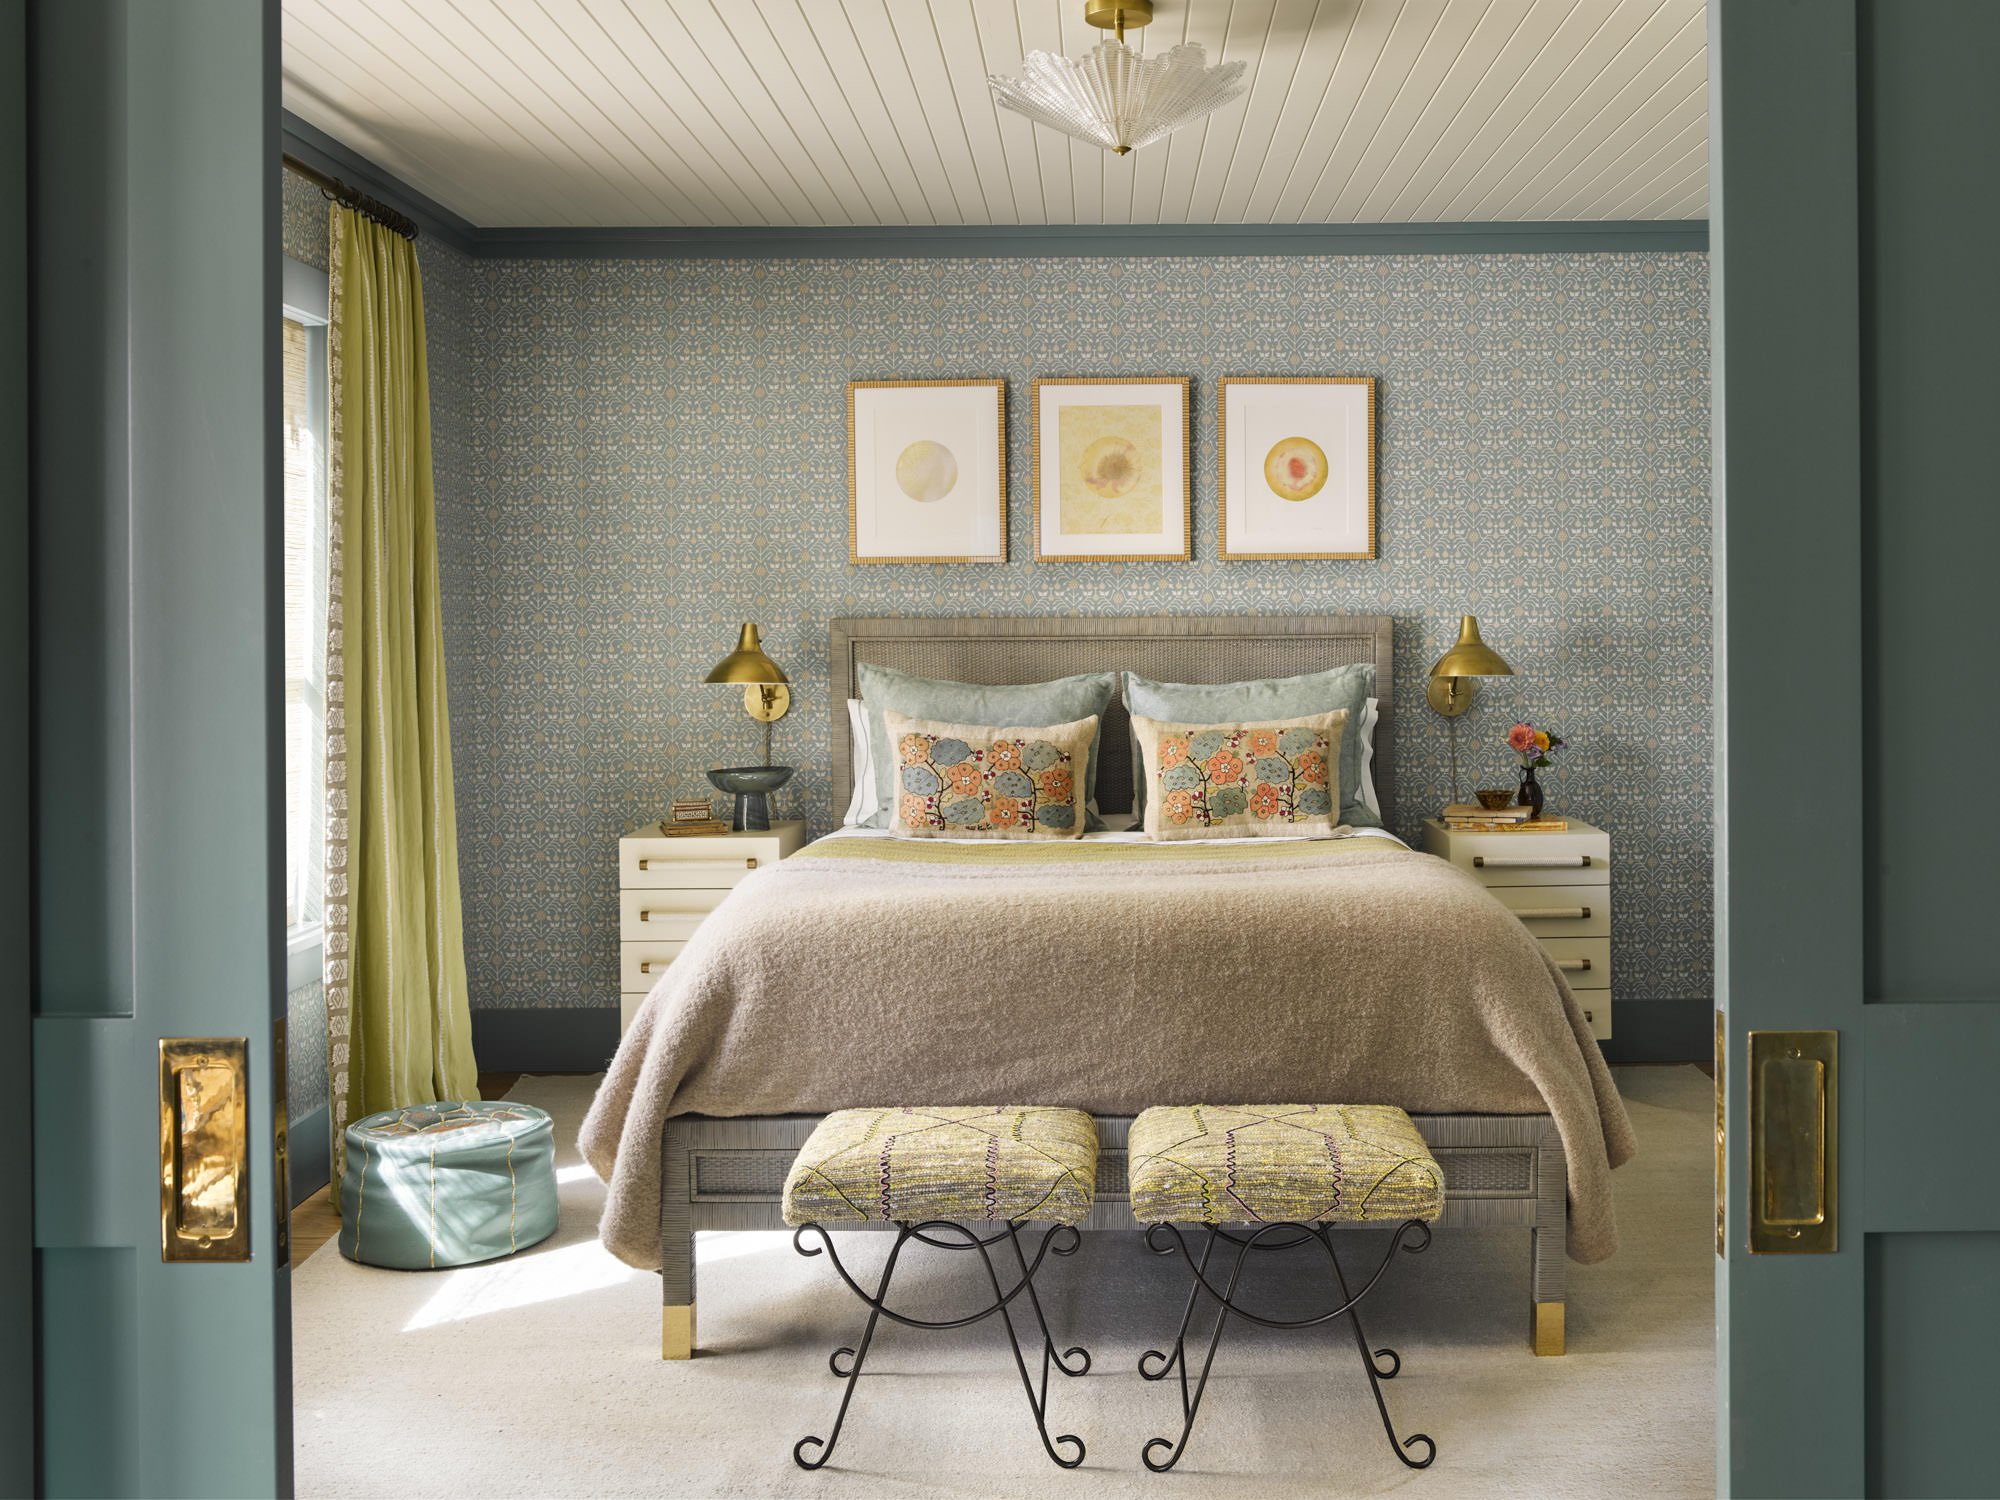   THE GUEST BEDROOM WALLS ARE COVERED IN ZAK + FOX WALLPAPER; THE TRIM IS PAINTED DONALD KAUFMAN DKC-104. THE VINTAGE WOOL KILIM RUG IS FROM ELIKO. THE CHARTREUSE LINEN CURTAINS ARE FROM NICOLA TAYLORSON, THE PAIR OF NIGHTSTANDS IS FROM CHELSEA EDITI